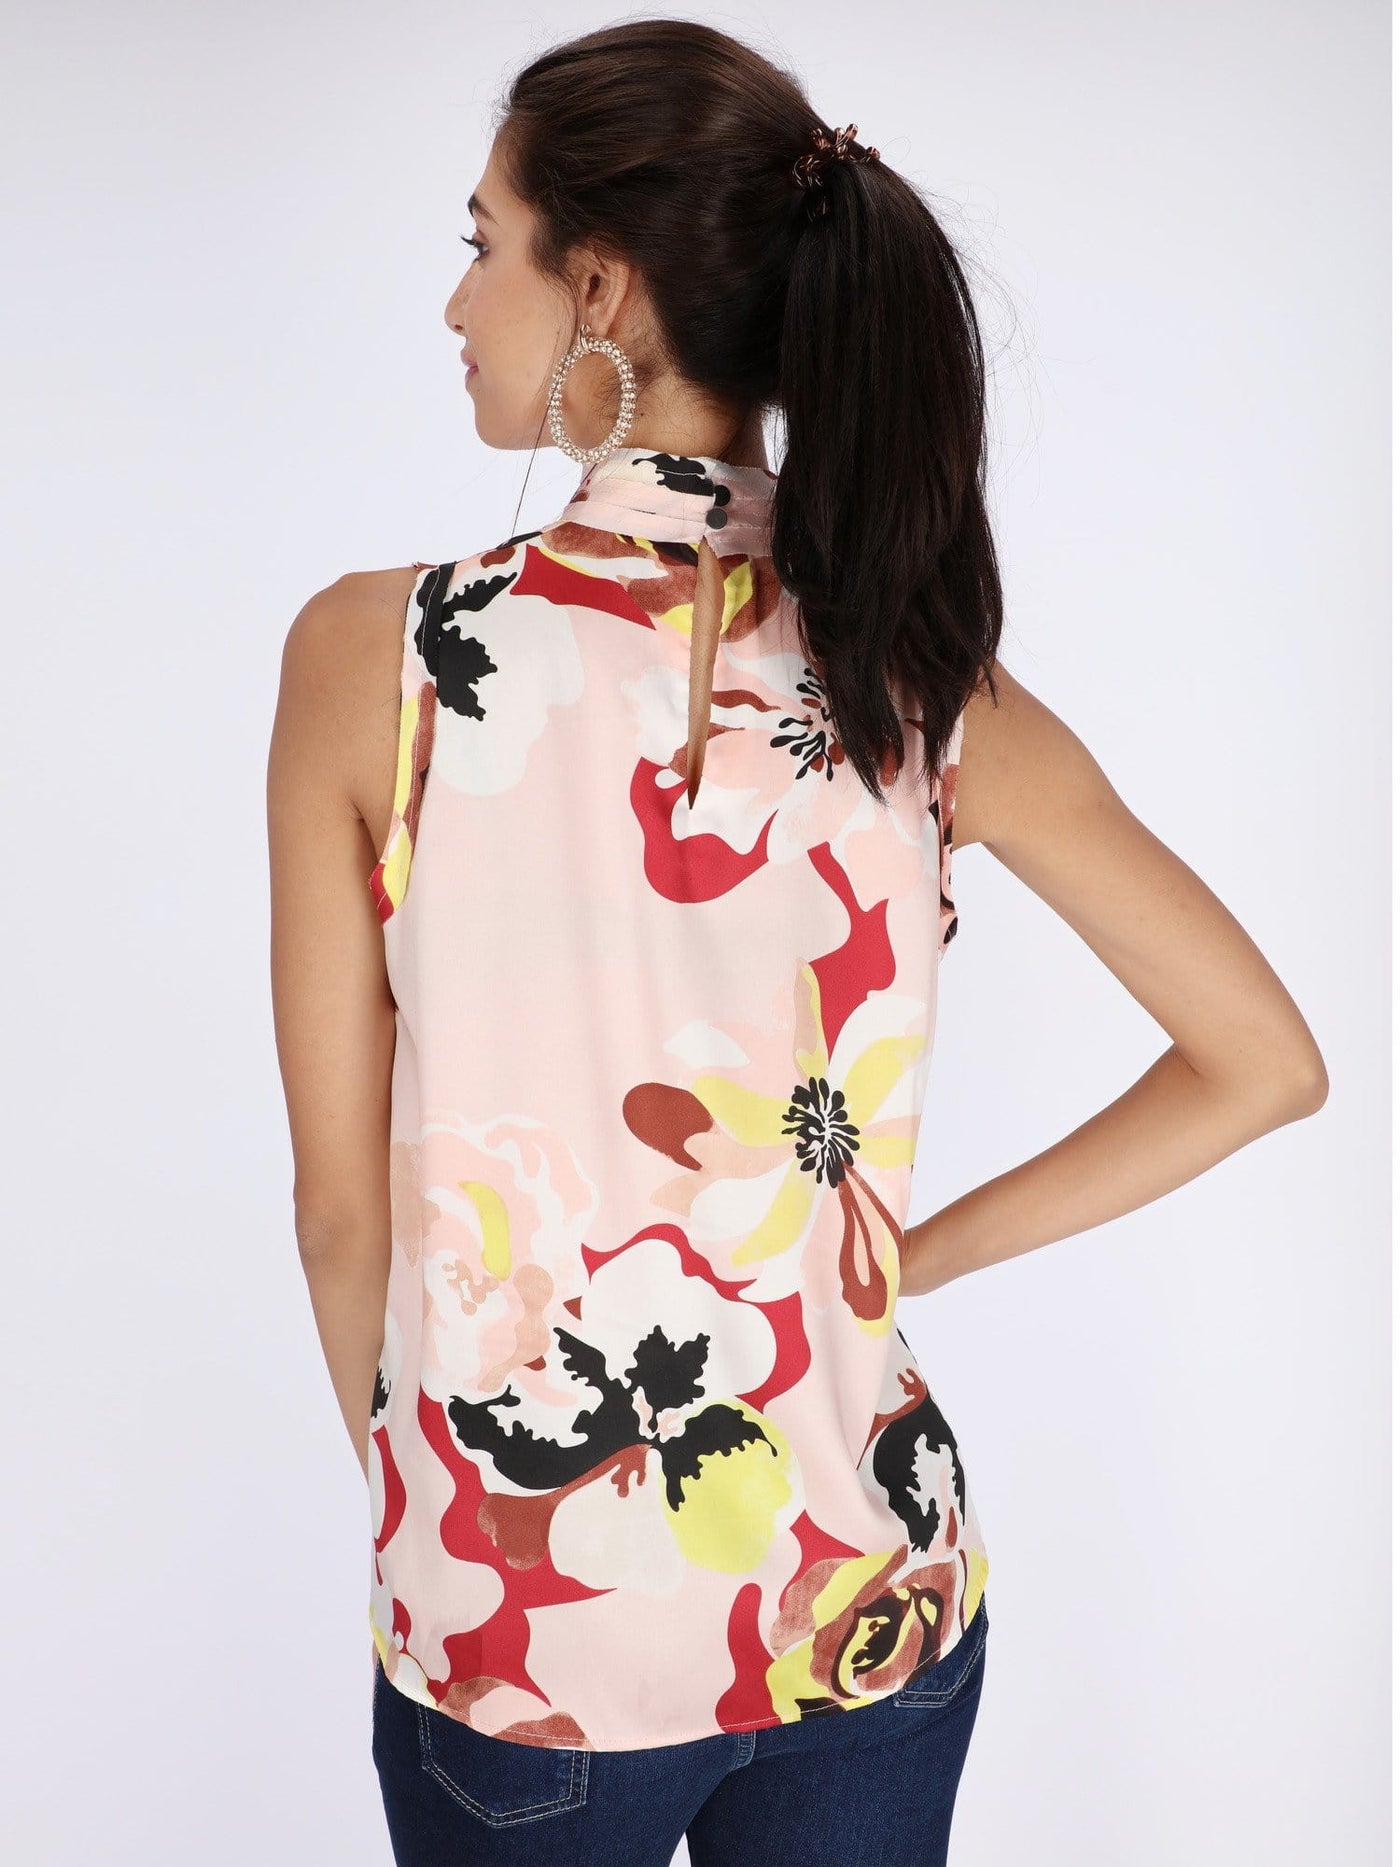 OR Tops & Blouses Floral Satin Sleeveless Blouse with High Neck